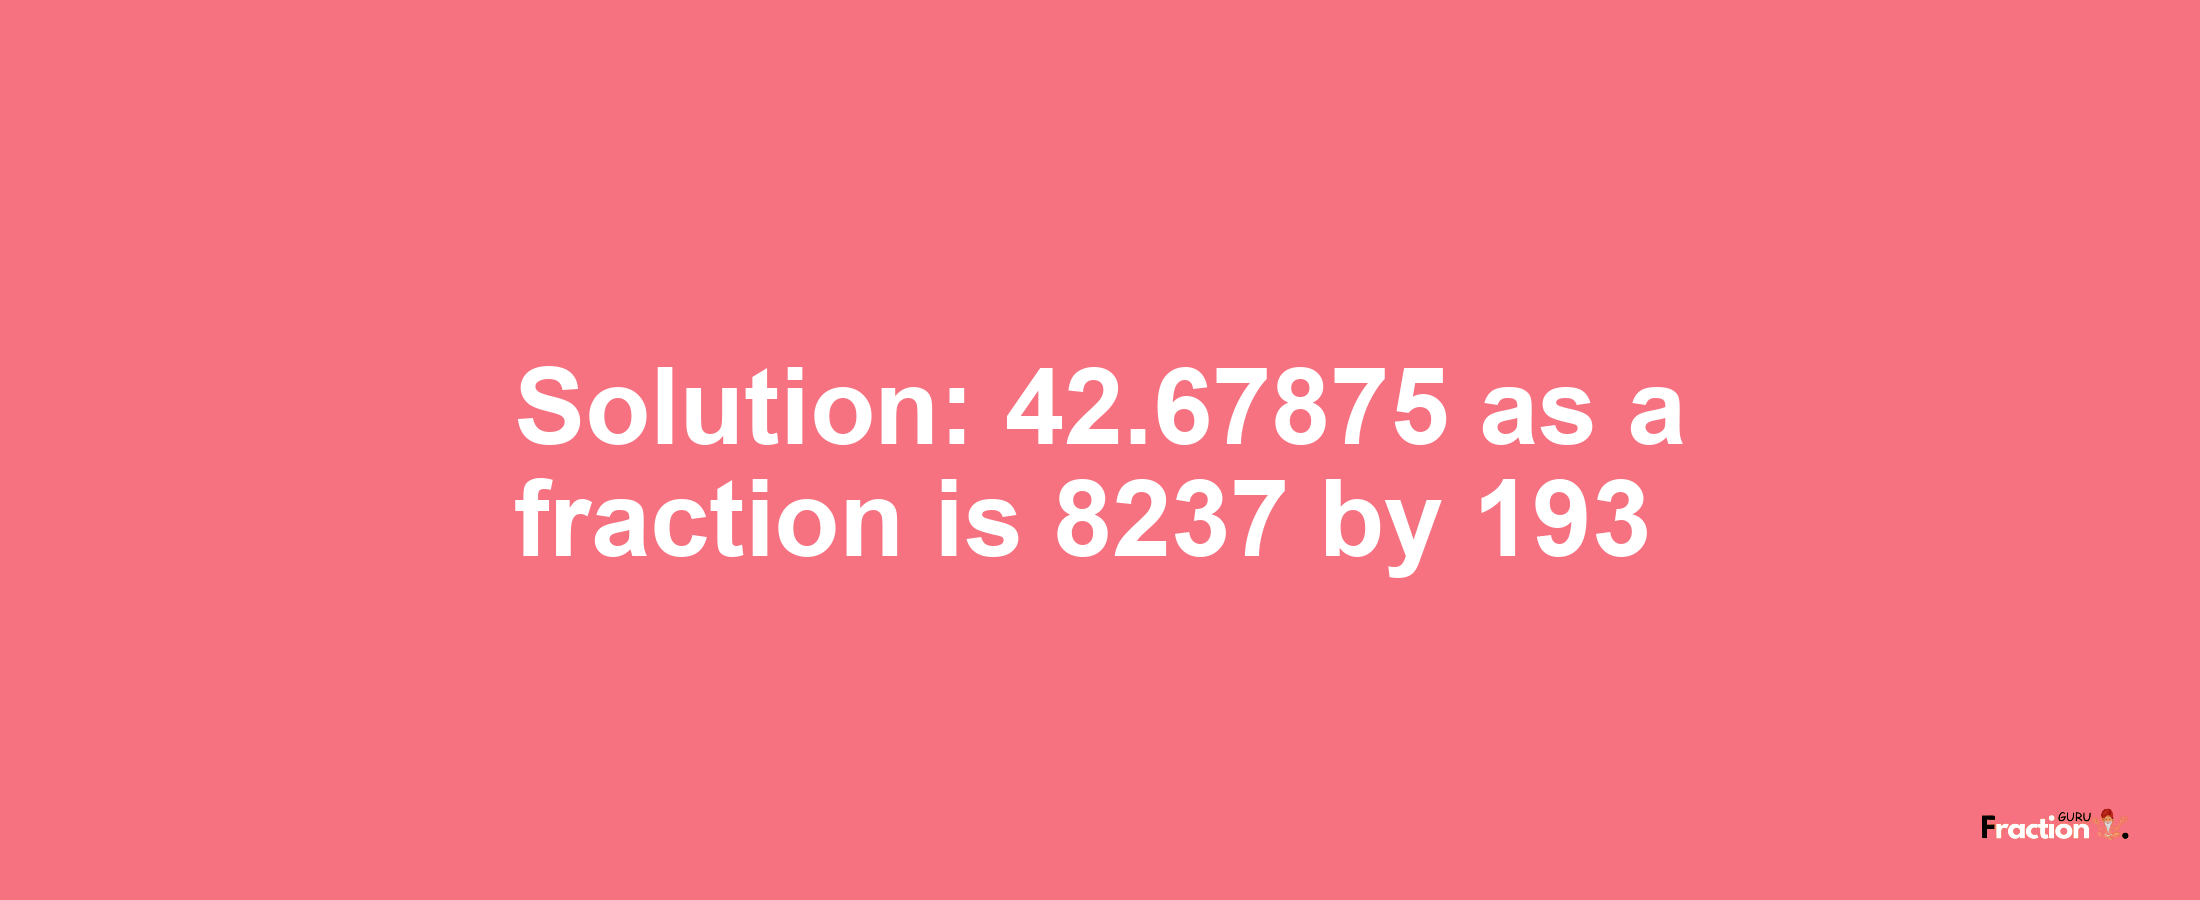 Solution:42.67875 as a fraction is 8237/193